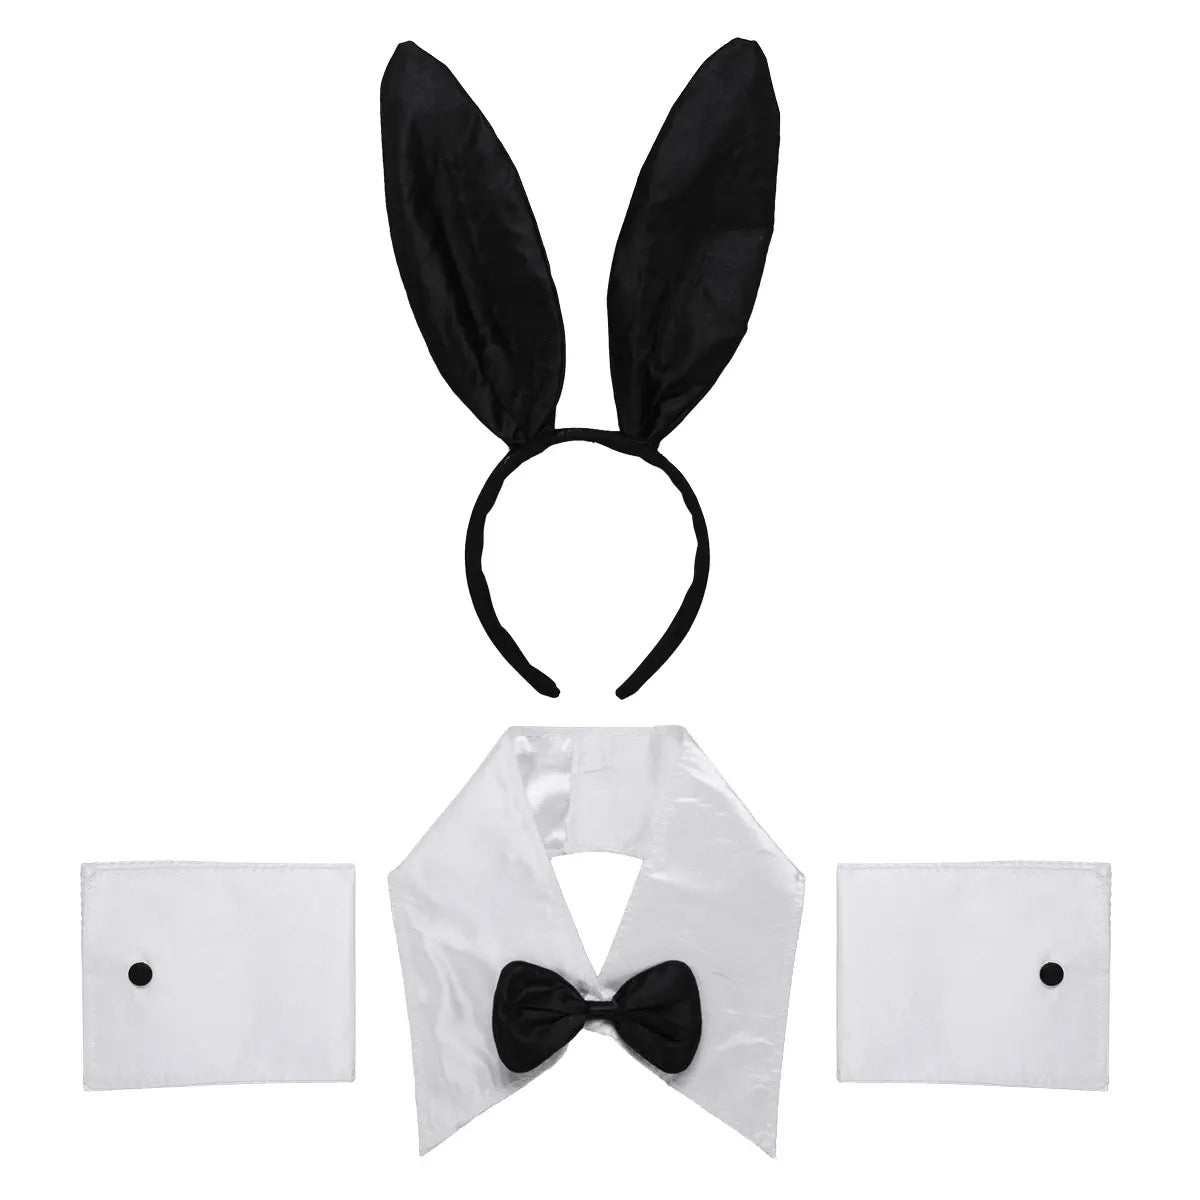 Sexy Playboy Bunny Rabbit Accessories Pack - Cuffs, Ears & Collar Bow Tie